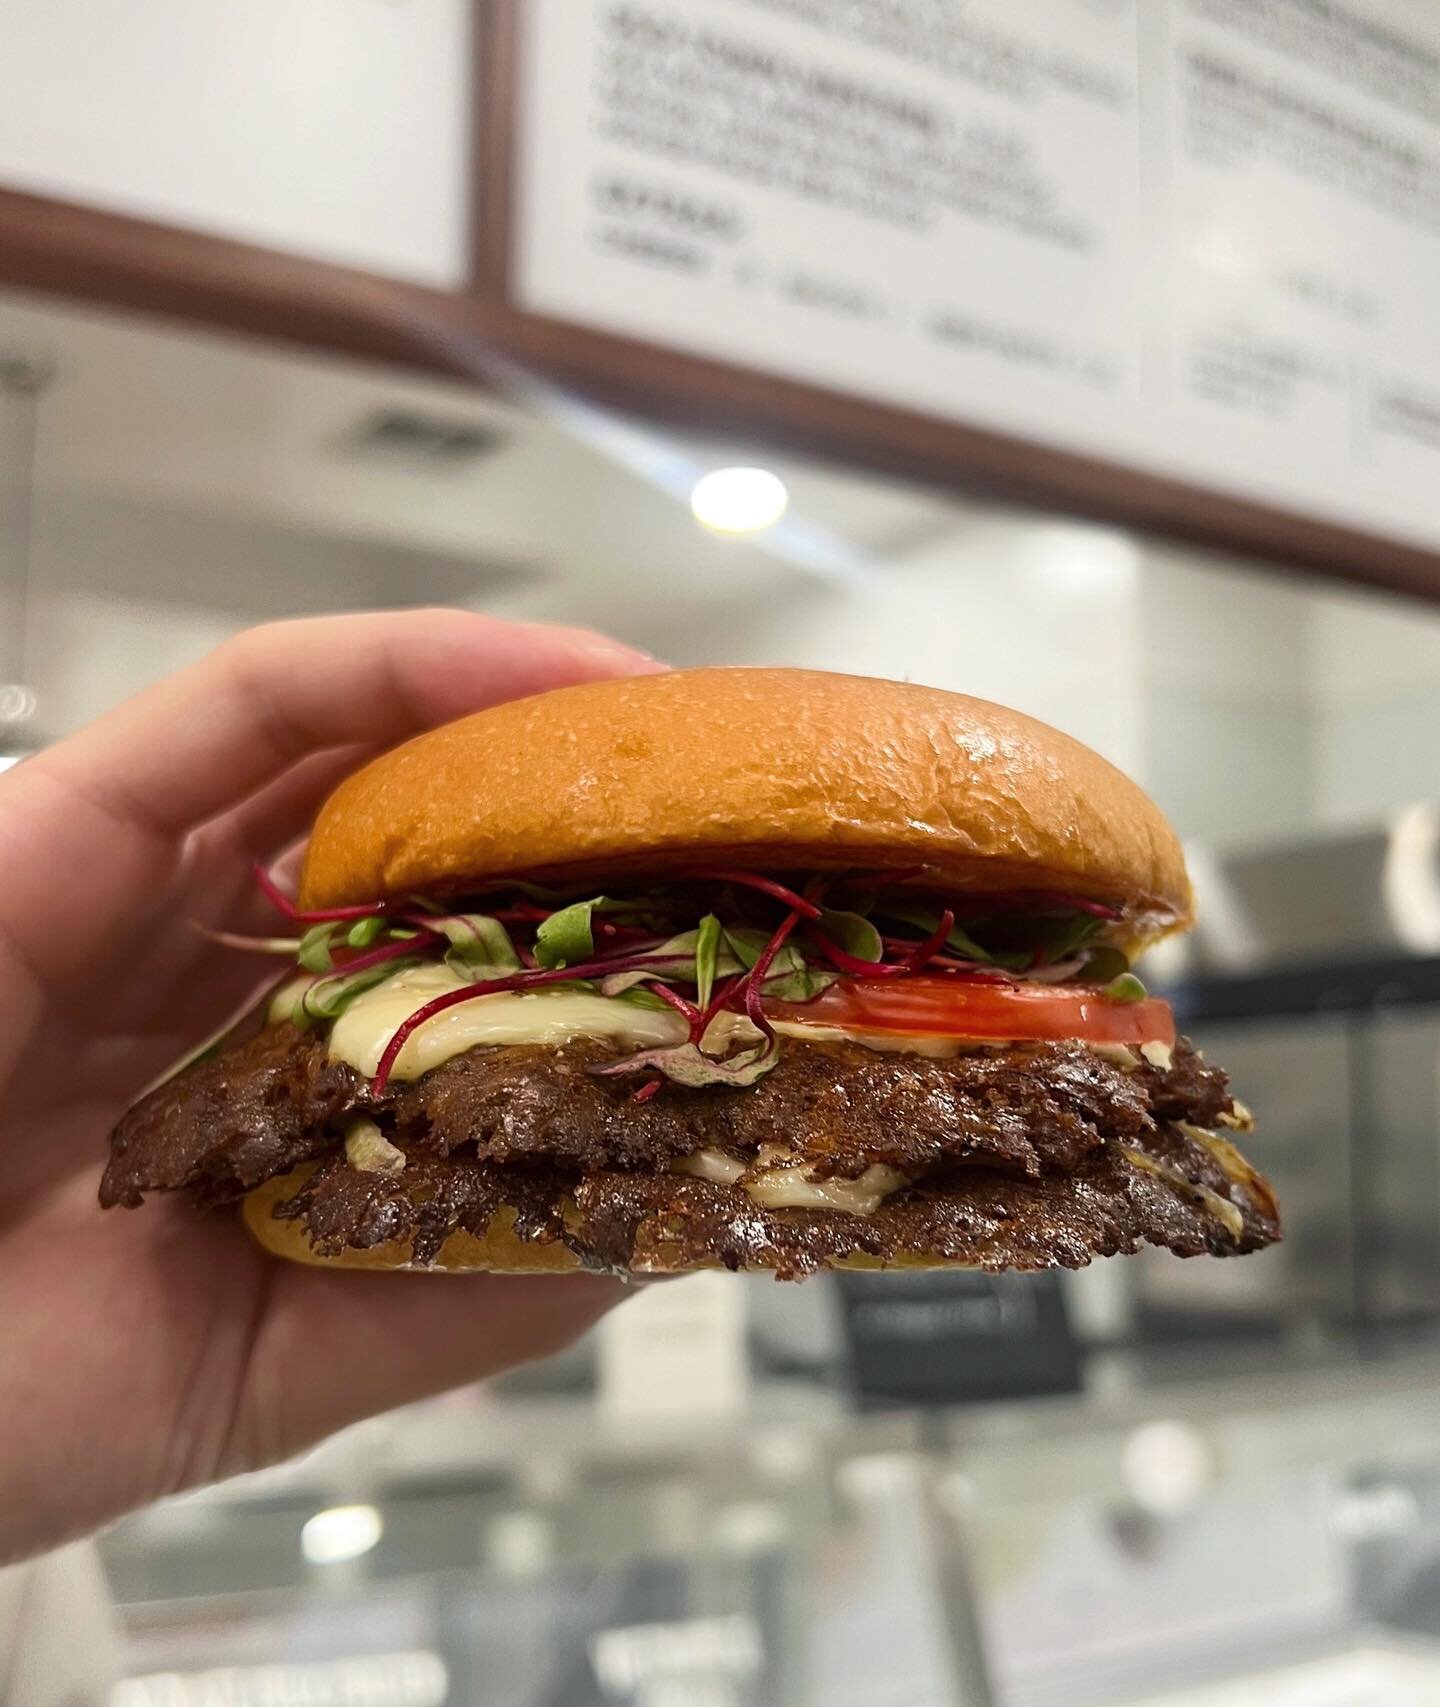 🇵🇭🍔 Celebrate Filipino American History Month with our limited-time special! Introducing the 'Sinigang Smashburger' - Double grass-fed patties, white American cheese, sinigang seasoning, tomatoes, micro greens, grilled onions and our house-made le